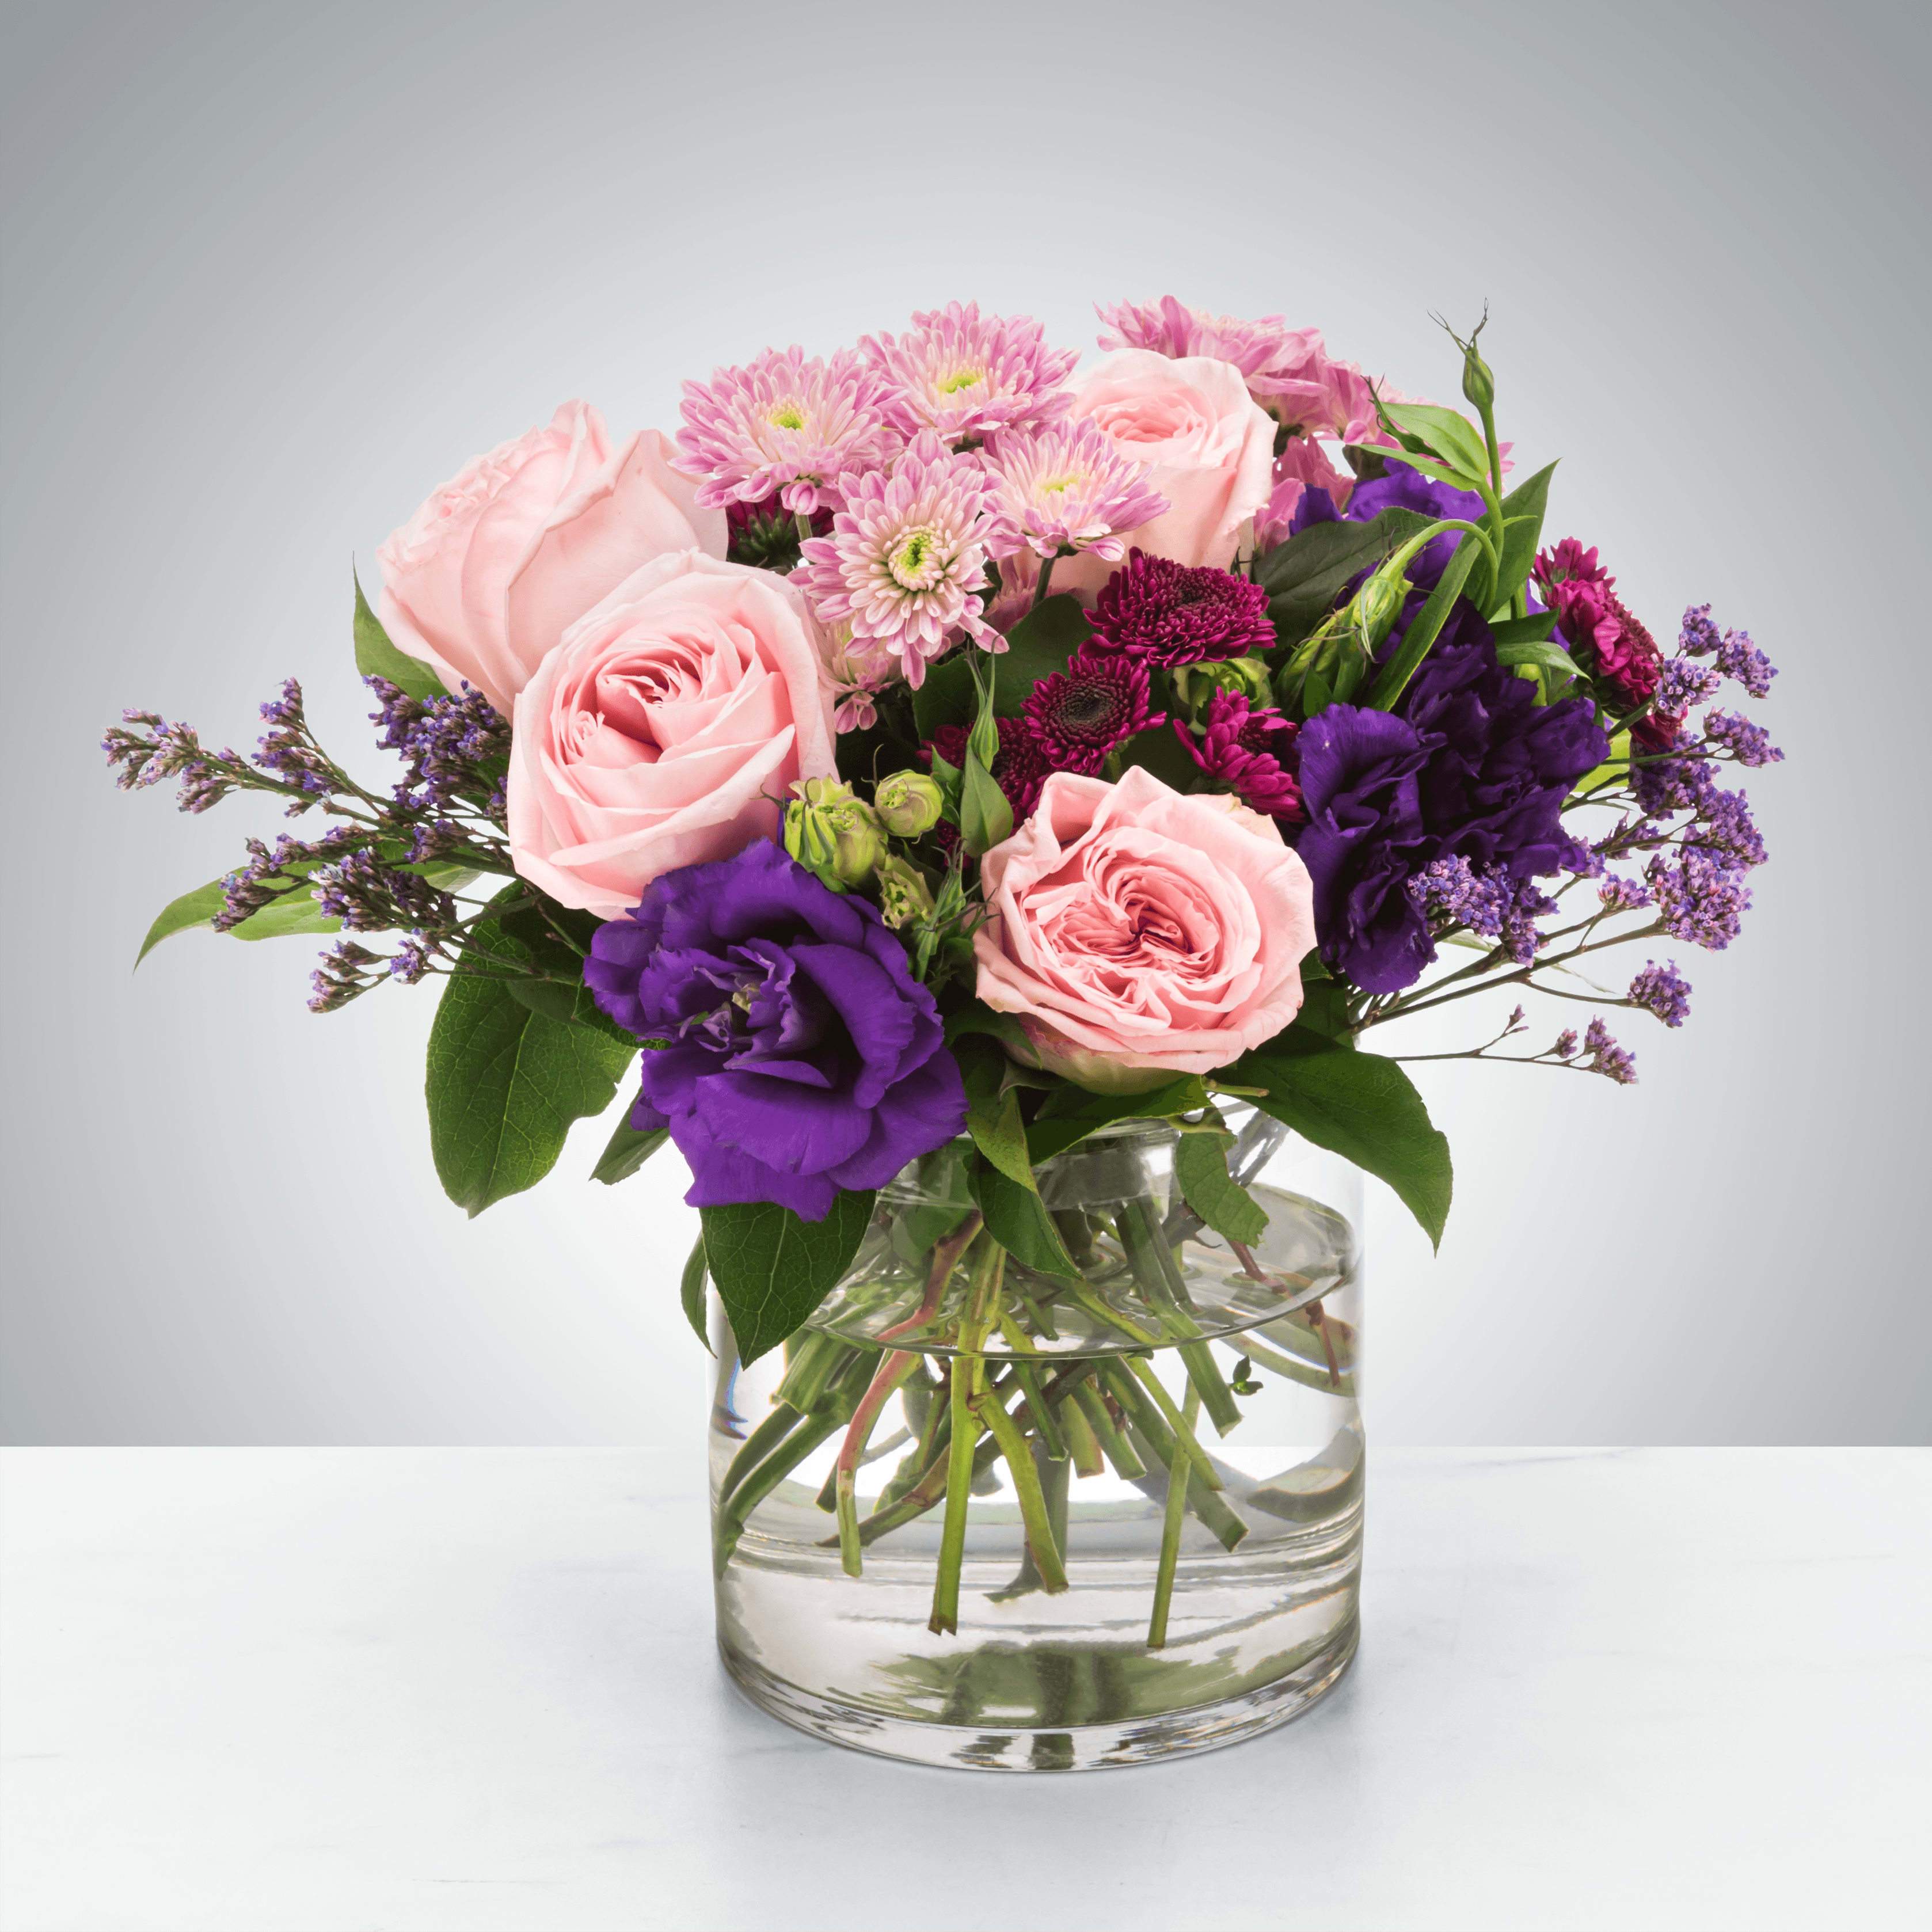 Coming Home by BloomNation™ - A selection of pink and purple flowers come together in an eye-pleasing arrangement. This arrangement makes a great gift for Mother's Day, Women's Day, or as a thinking of you present.  Approximate Dimensions: 10''D x 10''H